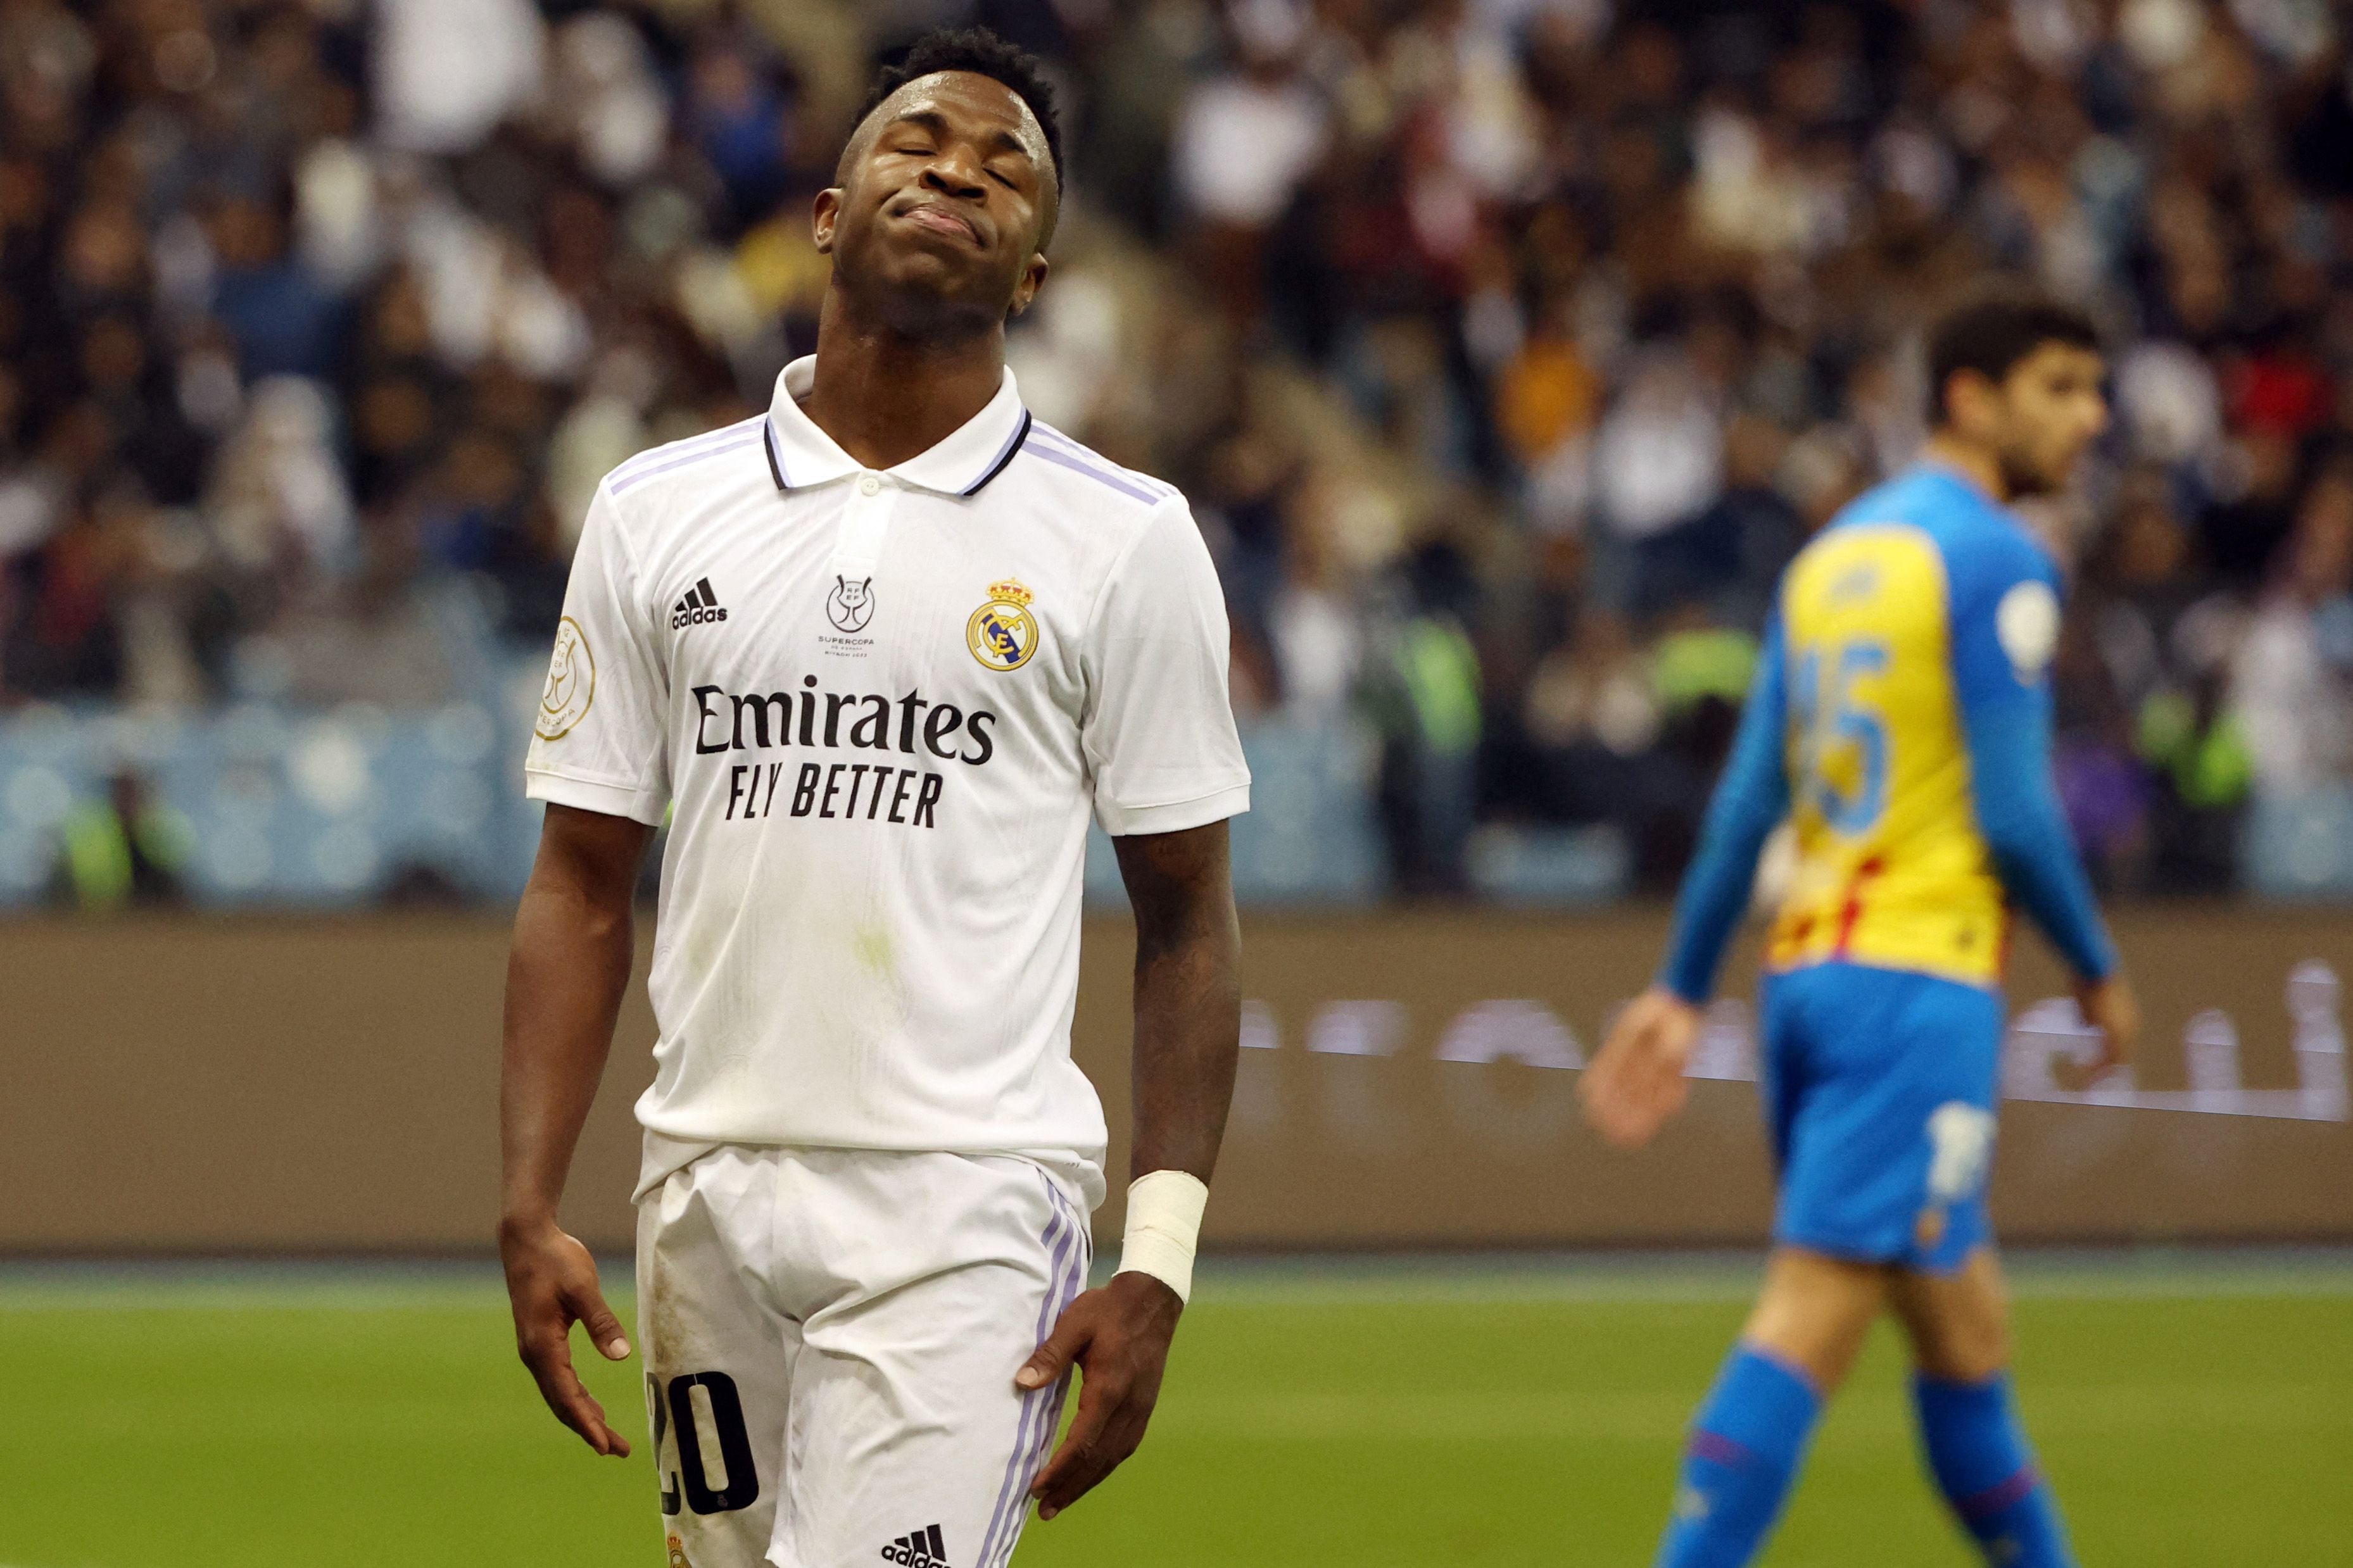 Real Madrid's Brazilian forward Vinicius Junior reacts during the Spanish Super Cup semi-final football match between Real Madrid CF and Valencia CF at the King Fahd International Stadium in Riyadh, Saudi Arabia, on January 11, 2023. (Photo by Giuseppe CACACE / AFP)